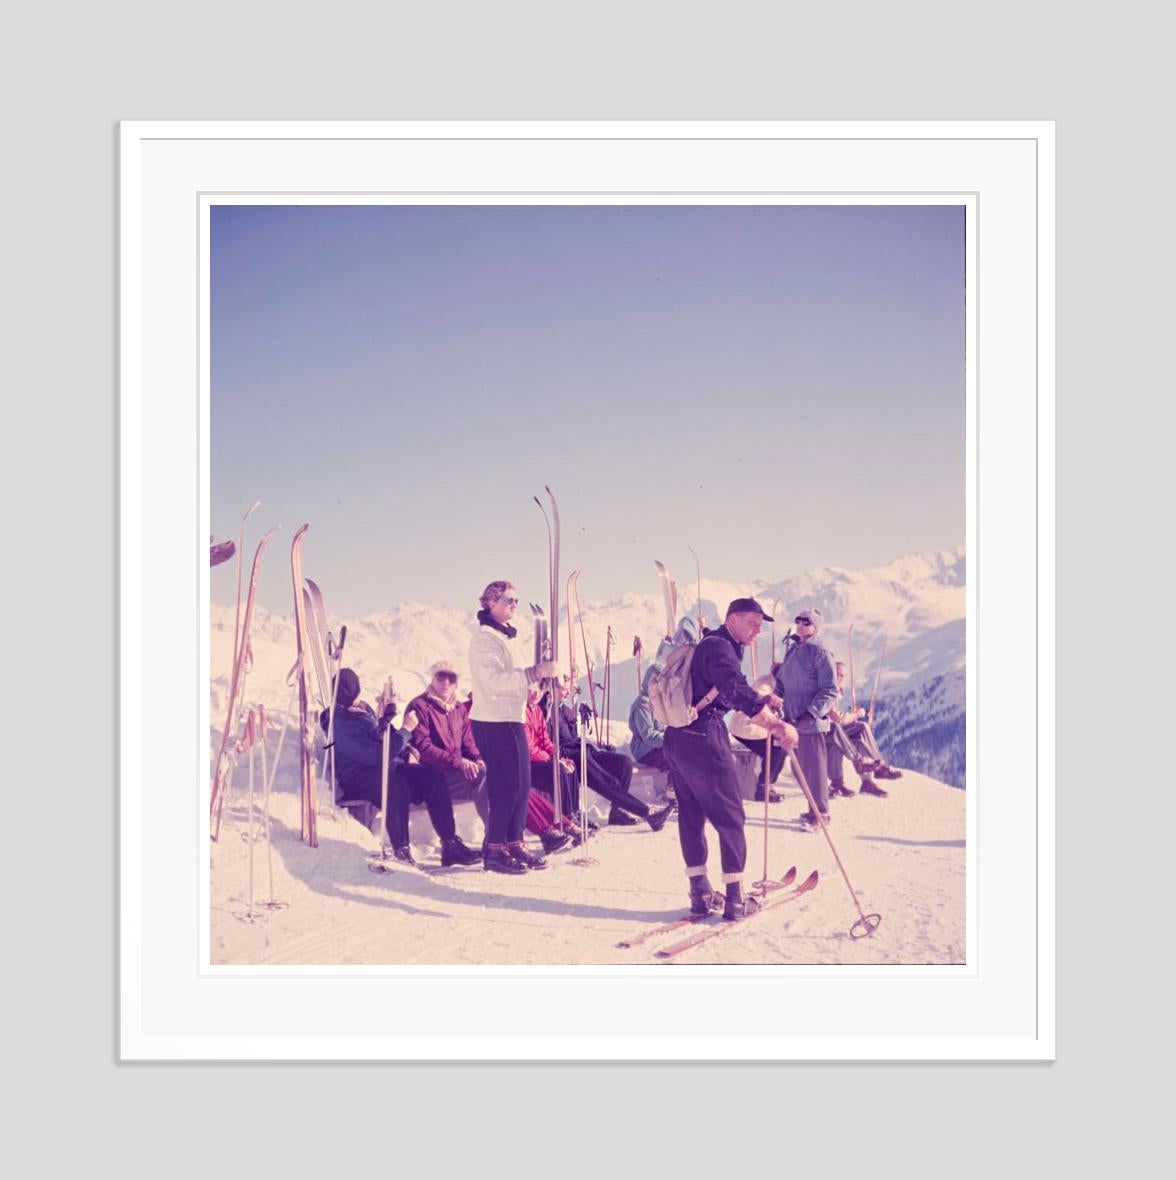 Mountain Top

1951

Skiers at the top of a run, Klosters, 1951.

by Toni Frissell

30 x 30